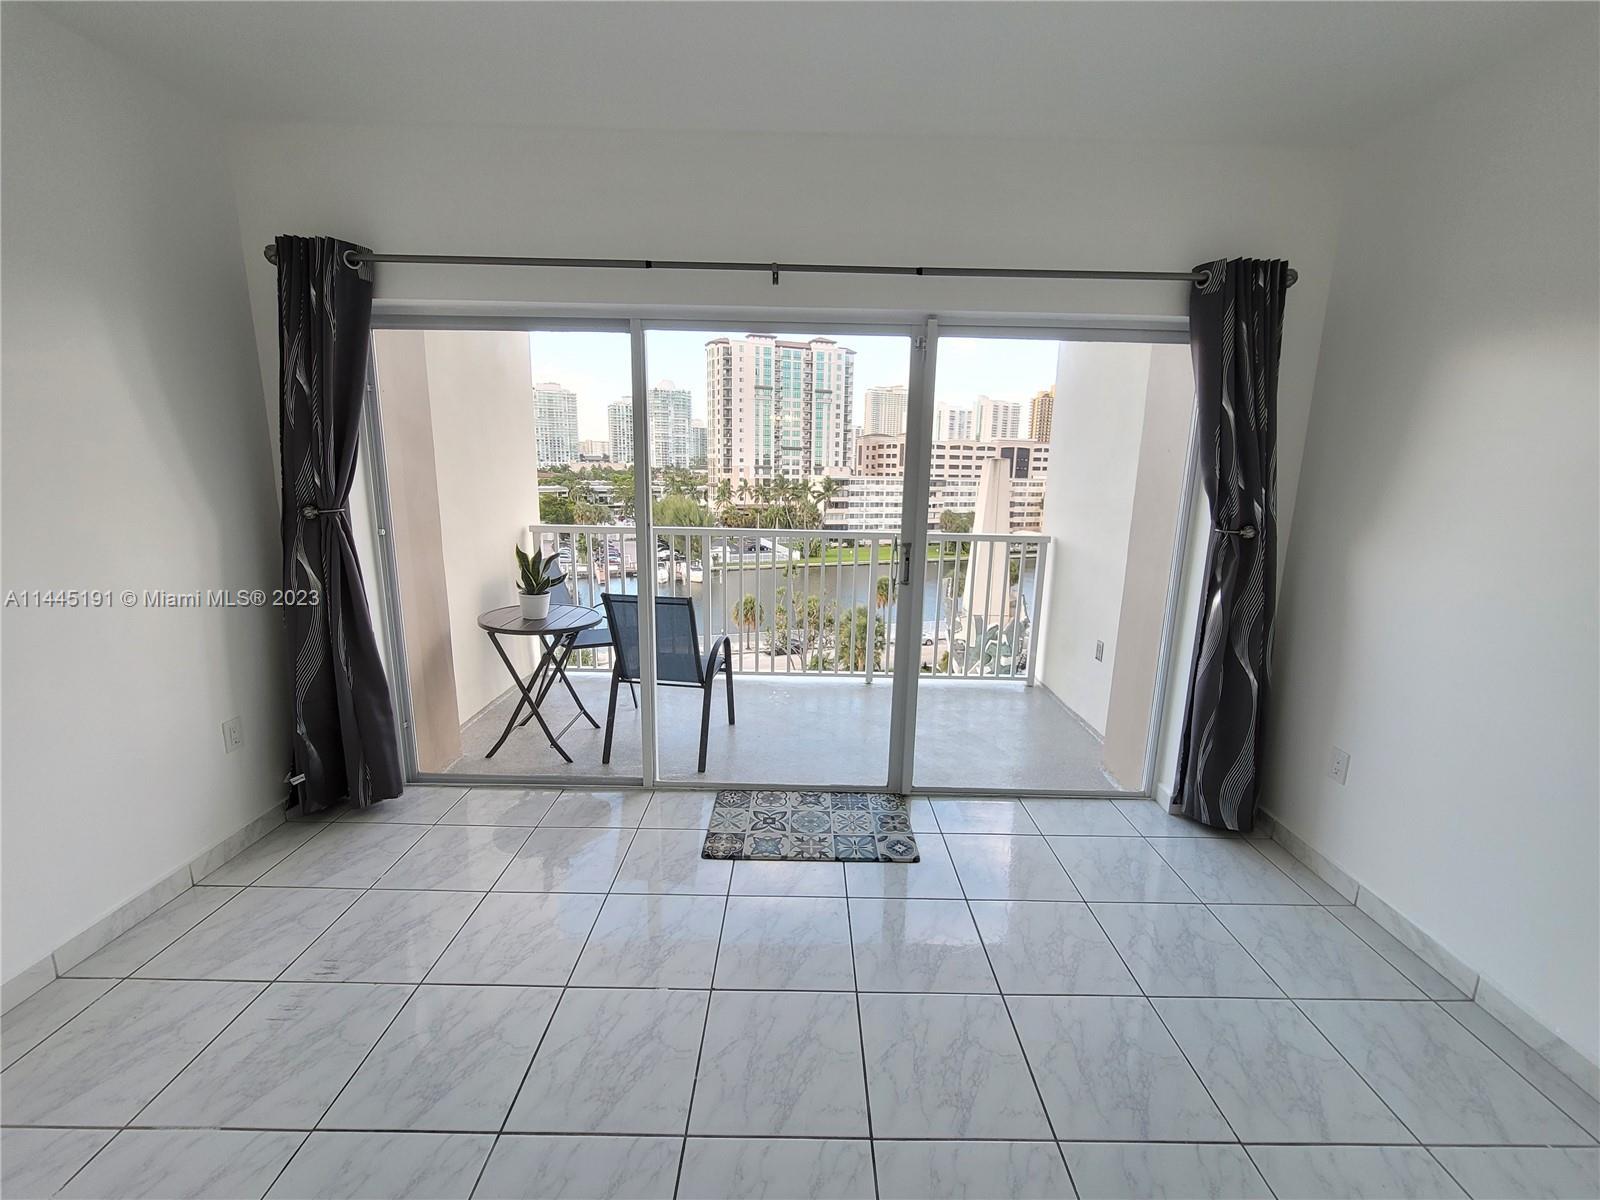 Updated & Spacious 1 bed/1.5 baths condo with new tile floors throughout, updated kitchen & bathroom